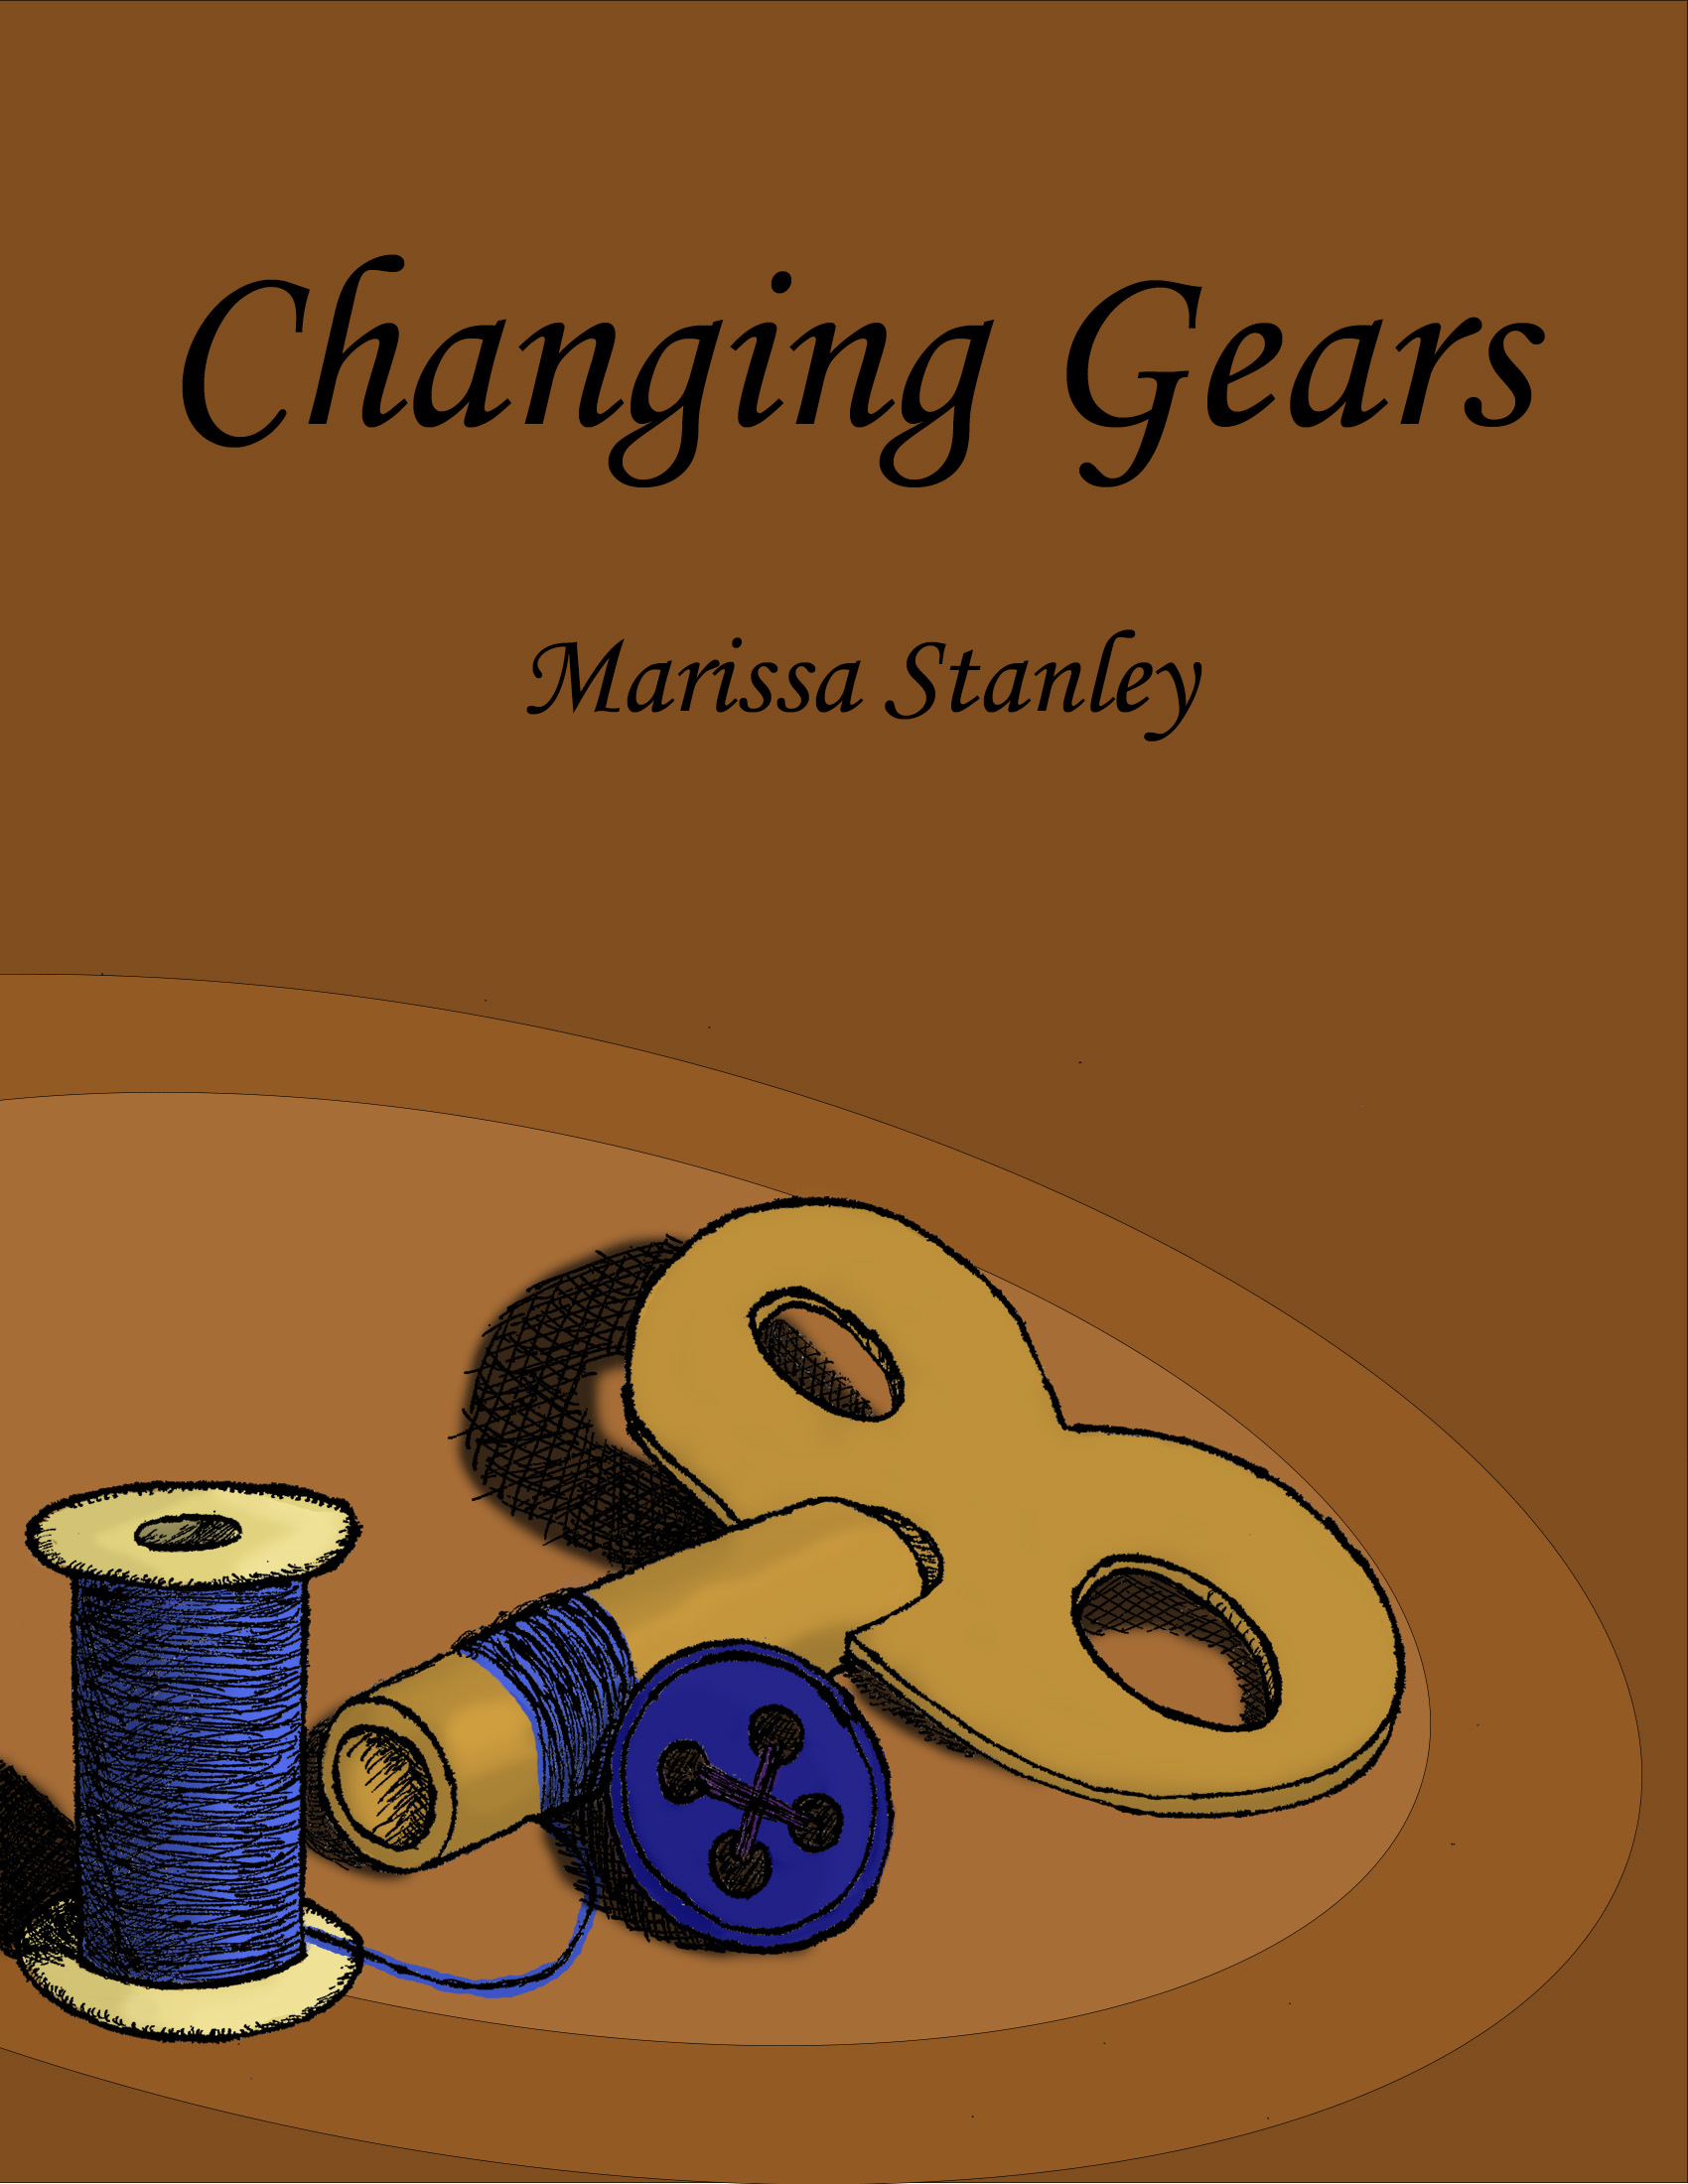 It has three objects to represent the three characters that will be followed in the story. A spool of thread to represent Strings Puppeteer, a clock key for Tinker Gears, and a button for Patches Burlap. The title Changing Gears is present as well the author’s name Marissa Stanley.